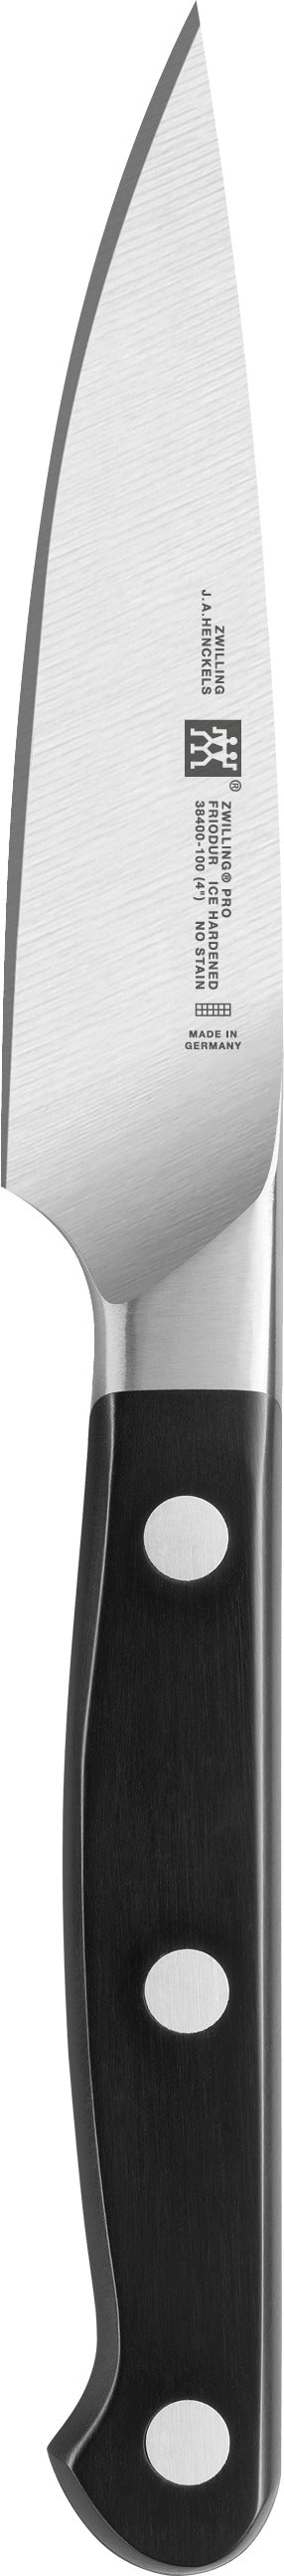 Zwilling PRO Smooth paring knife cm 10 Forged